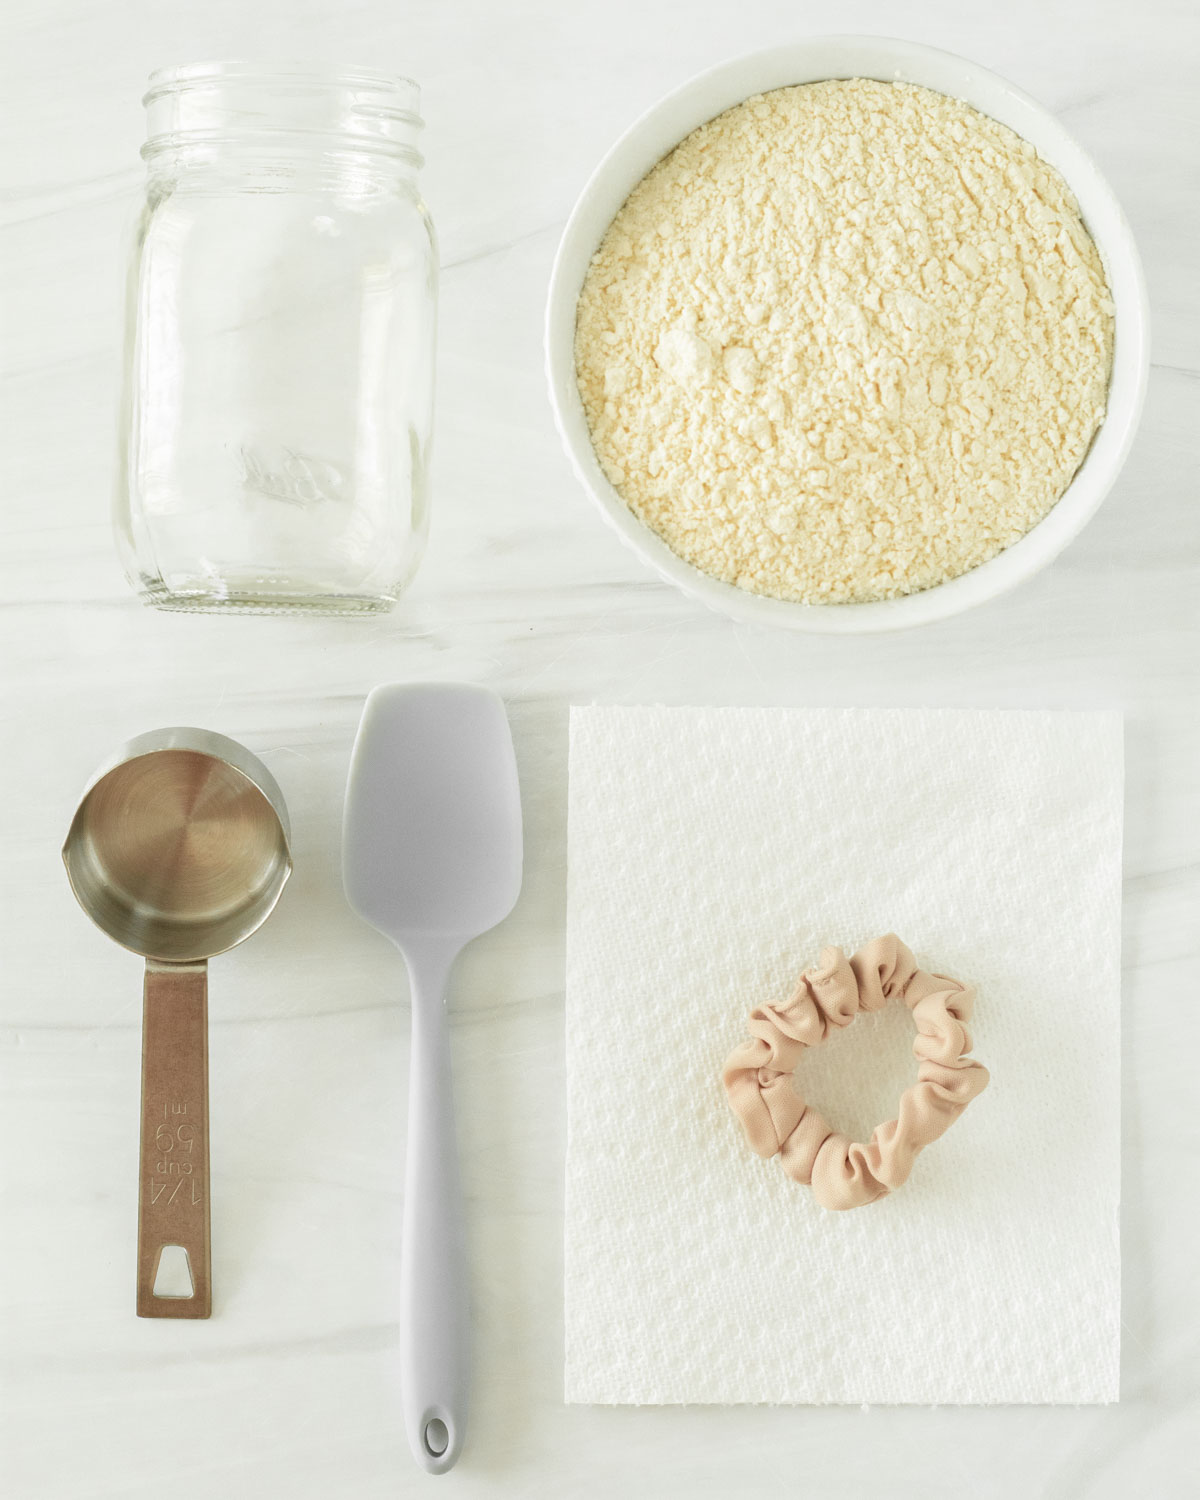 Learn how to make a sourdough starter in 7 days and how to maintain a sourdough starter to make sourdough recipes.